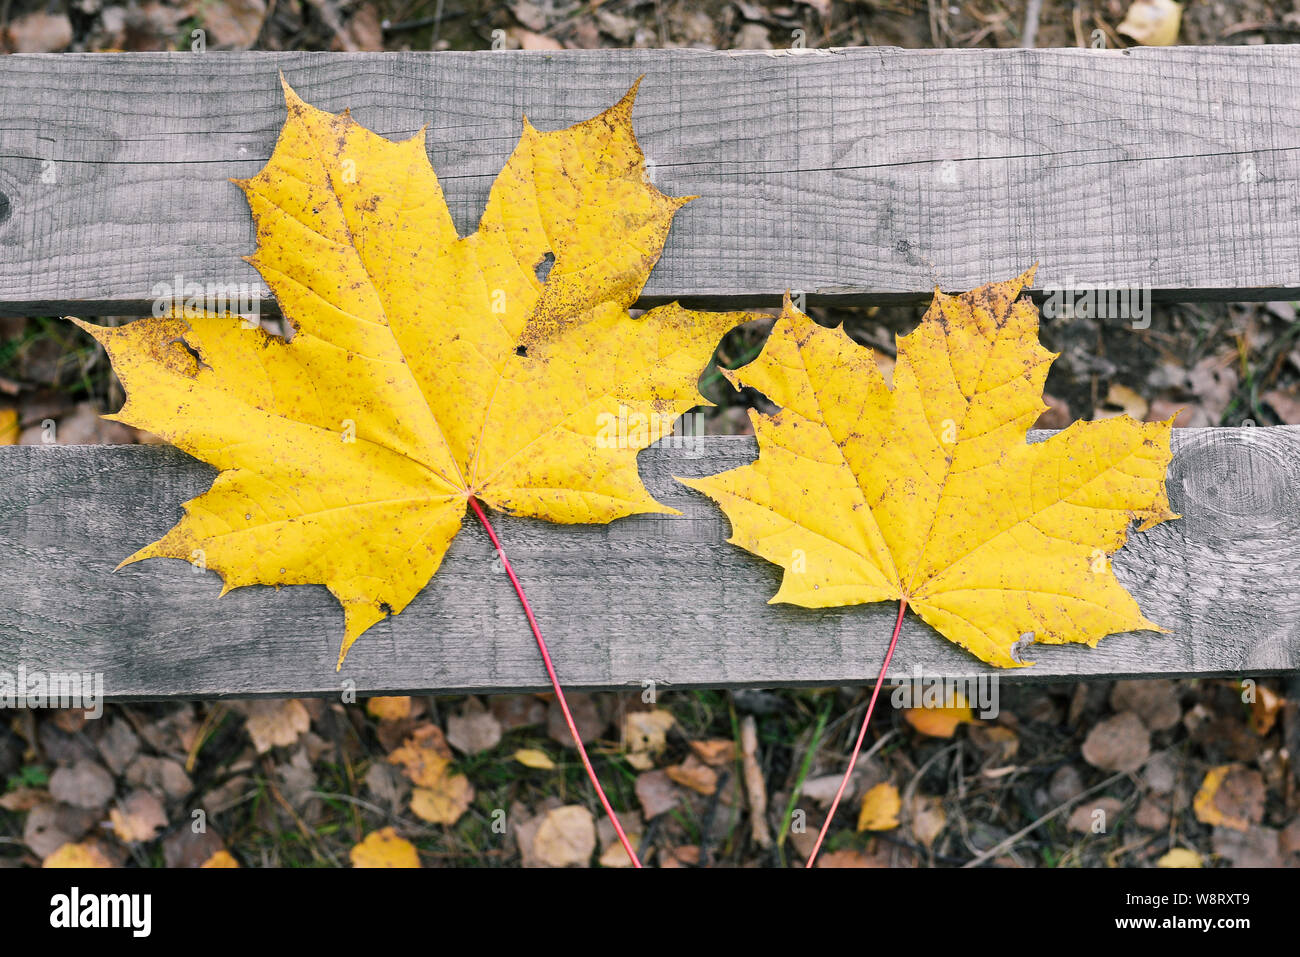 Autumn leaves lie on a wooden bench. Dry yellow maple leaves. Nature, change of season. Flat lay, top view Stock Photo